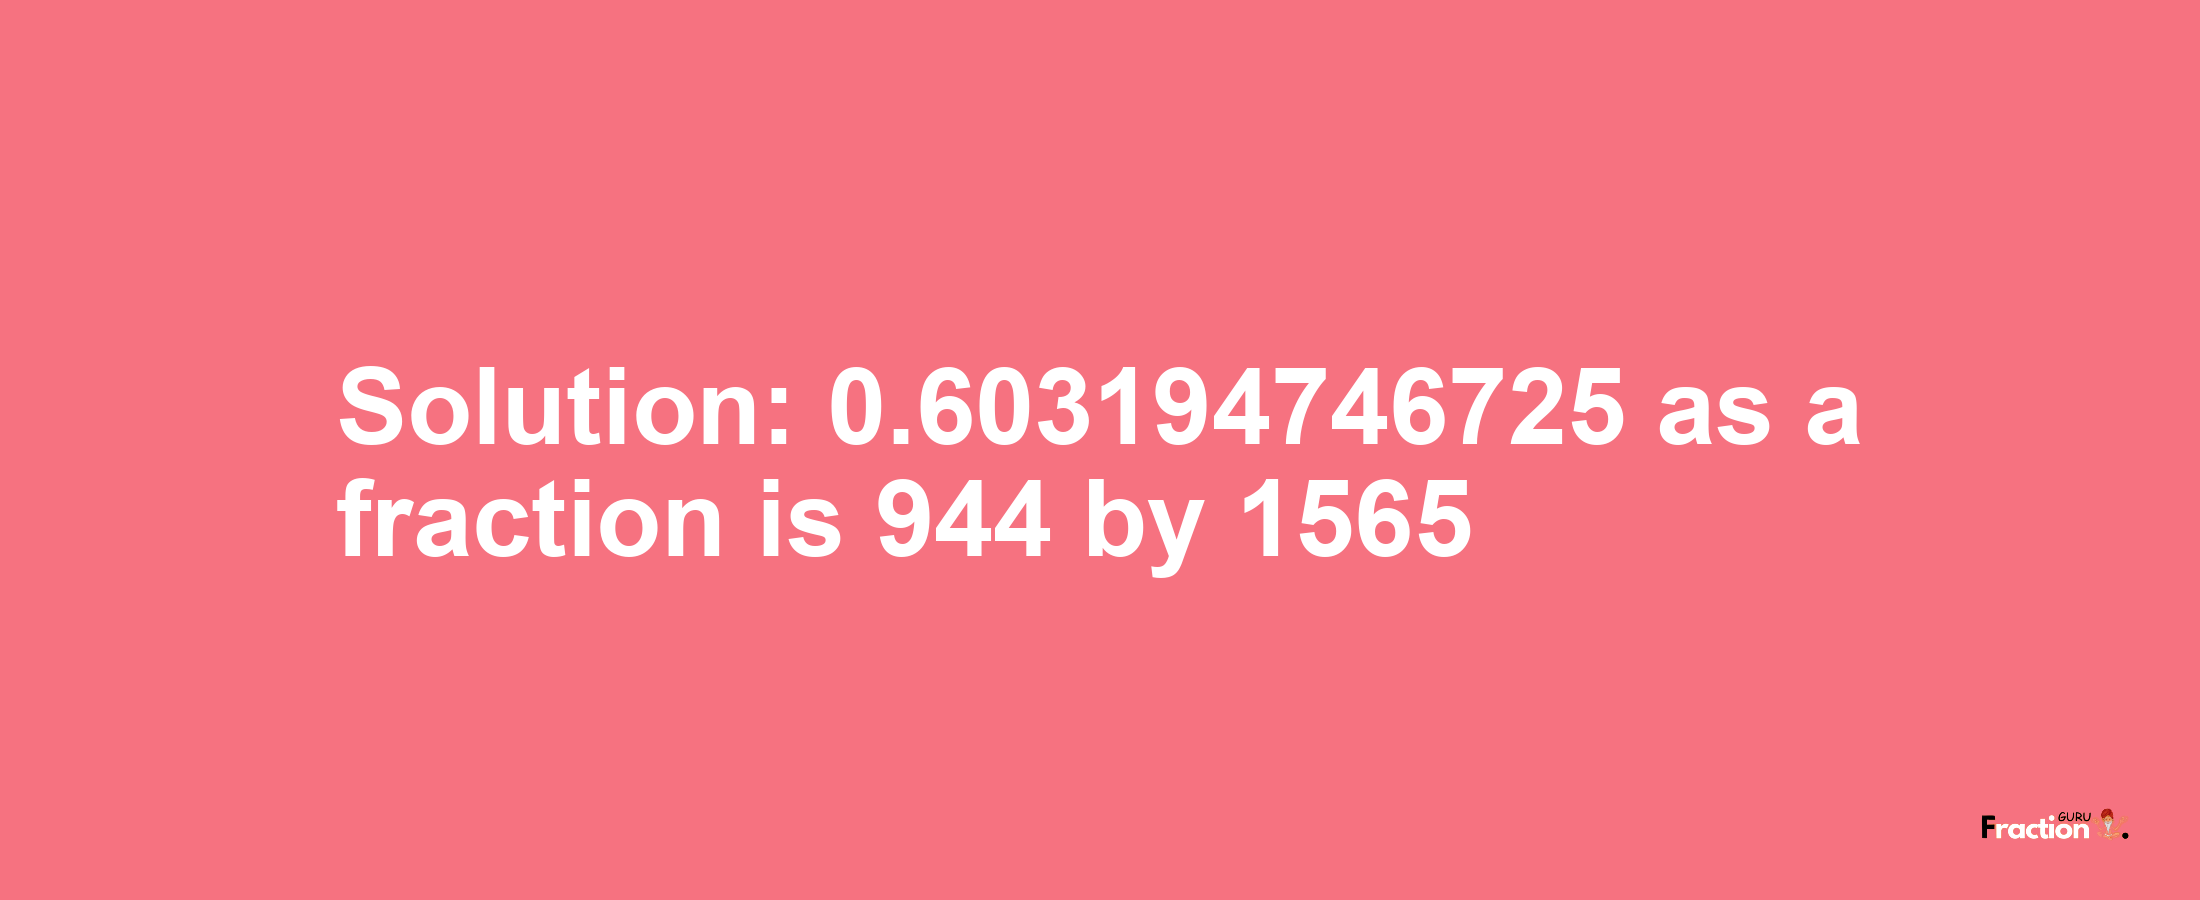 Solution:0.603194746725 as a fraction is 944/1565